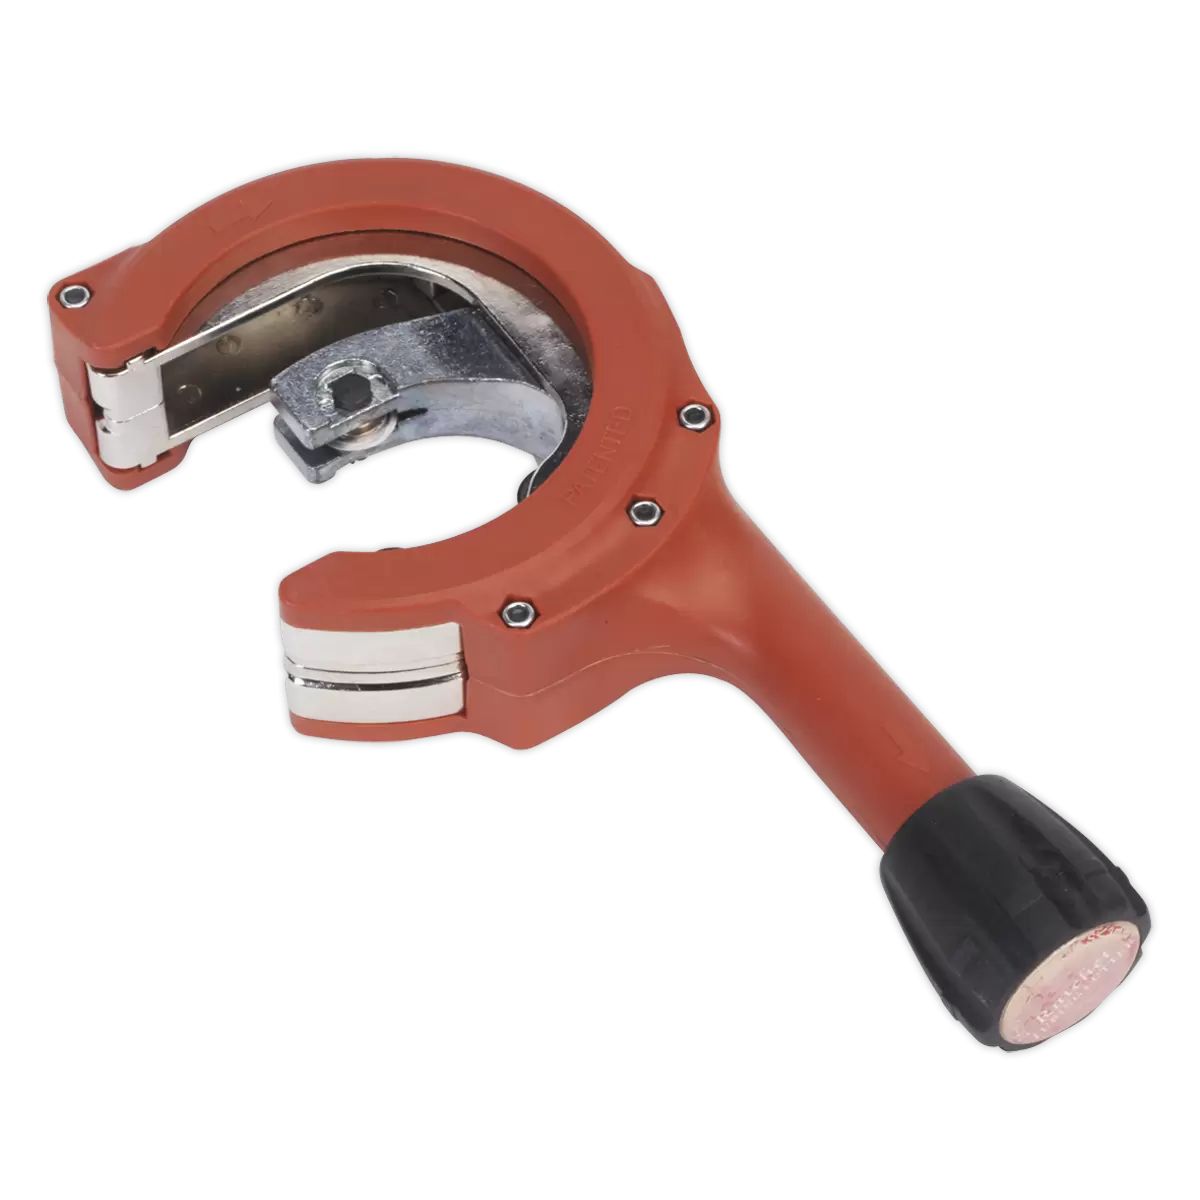 Sealey VS16371 Exhaust Pipe Cutter Ratcheting